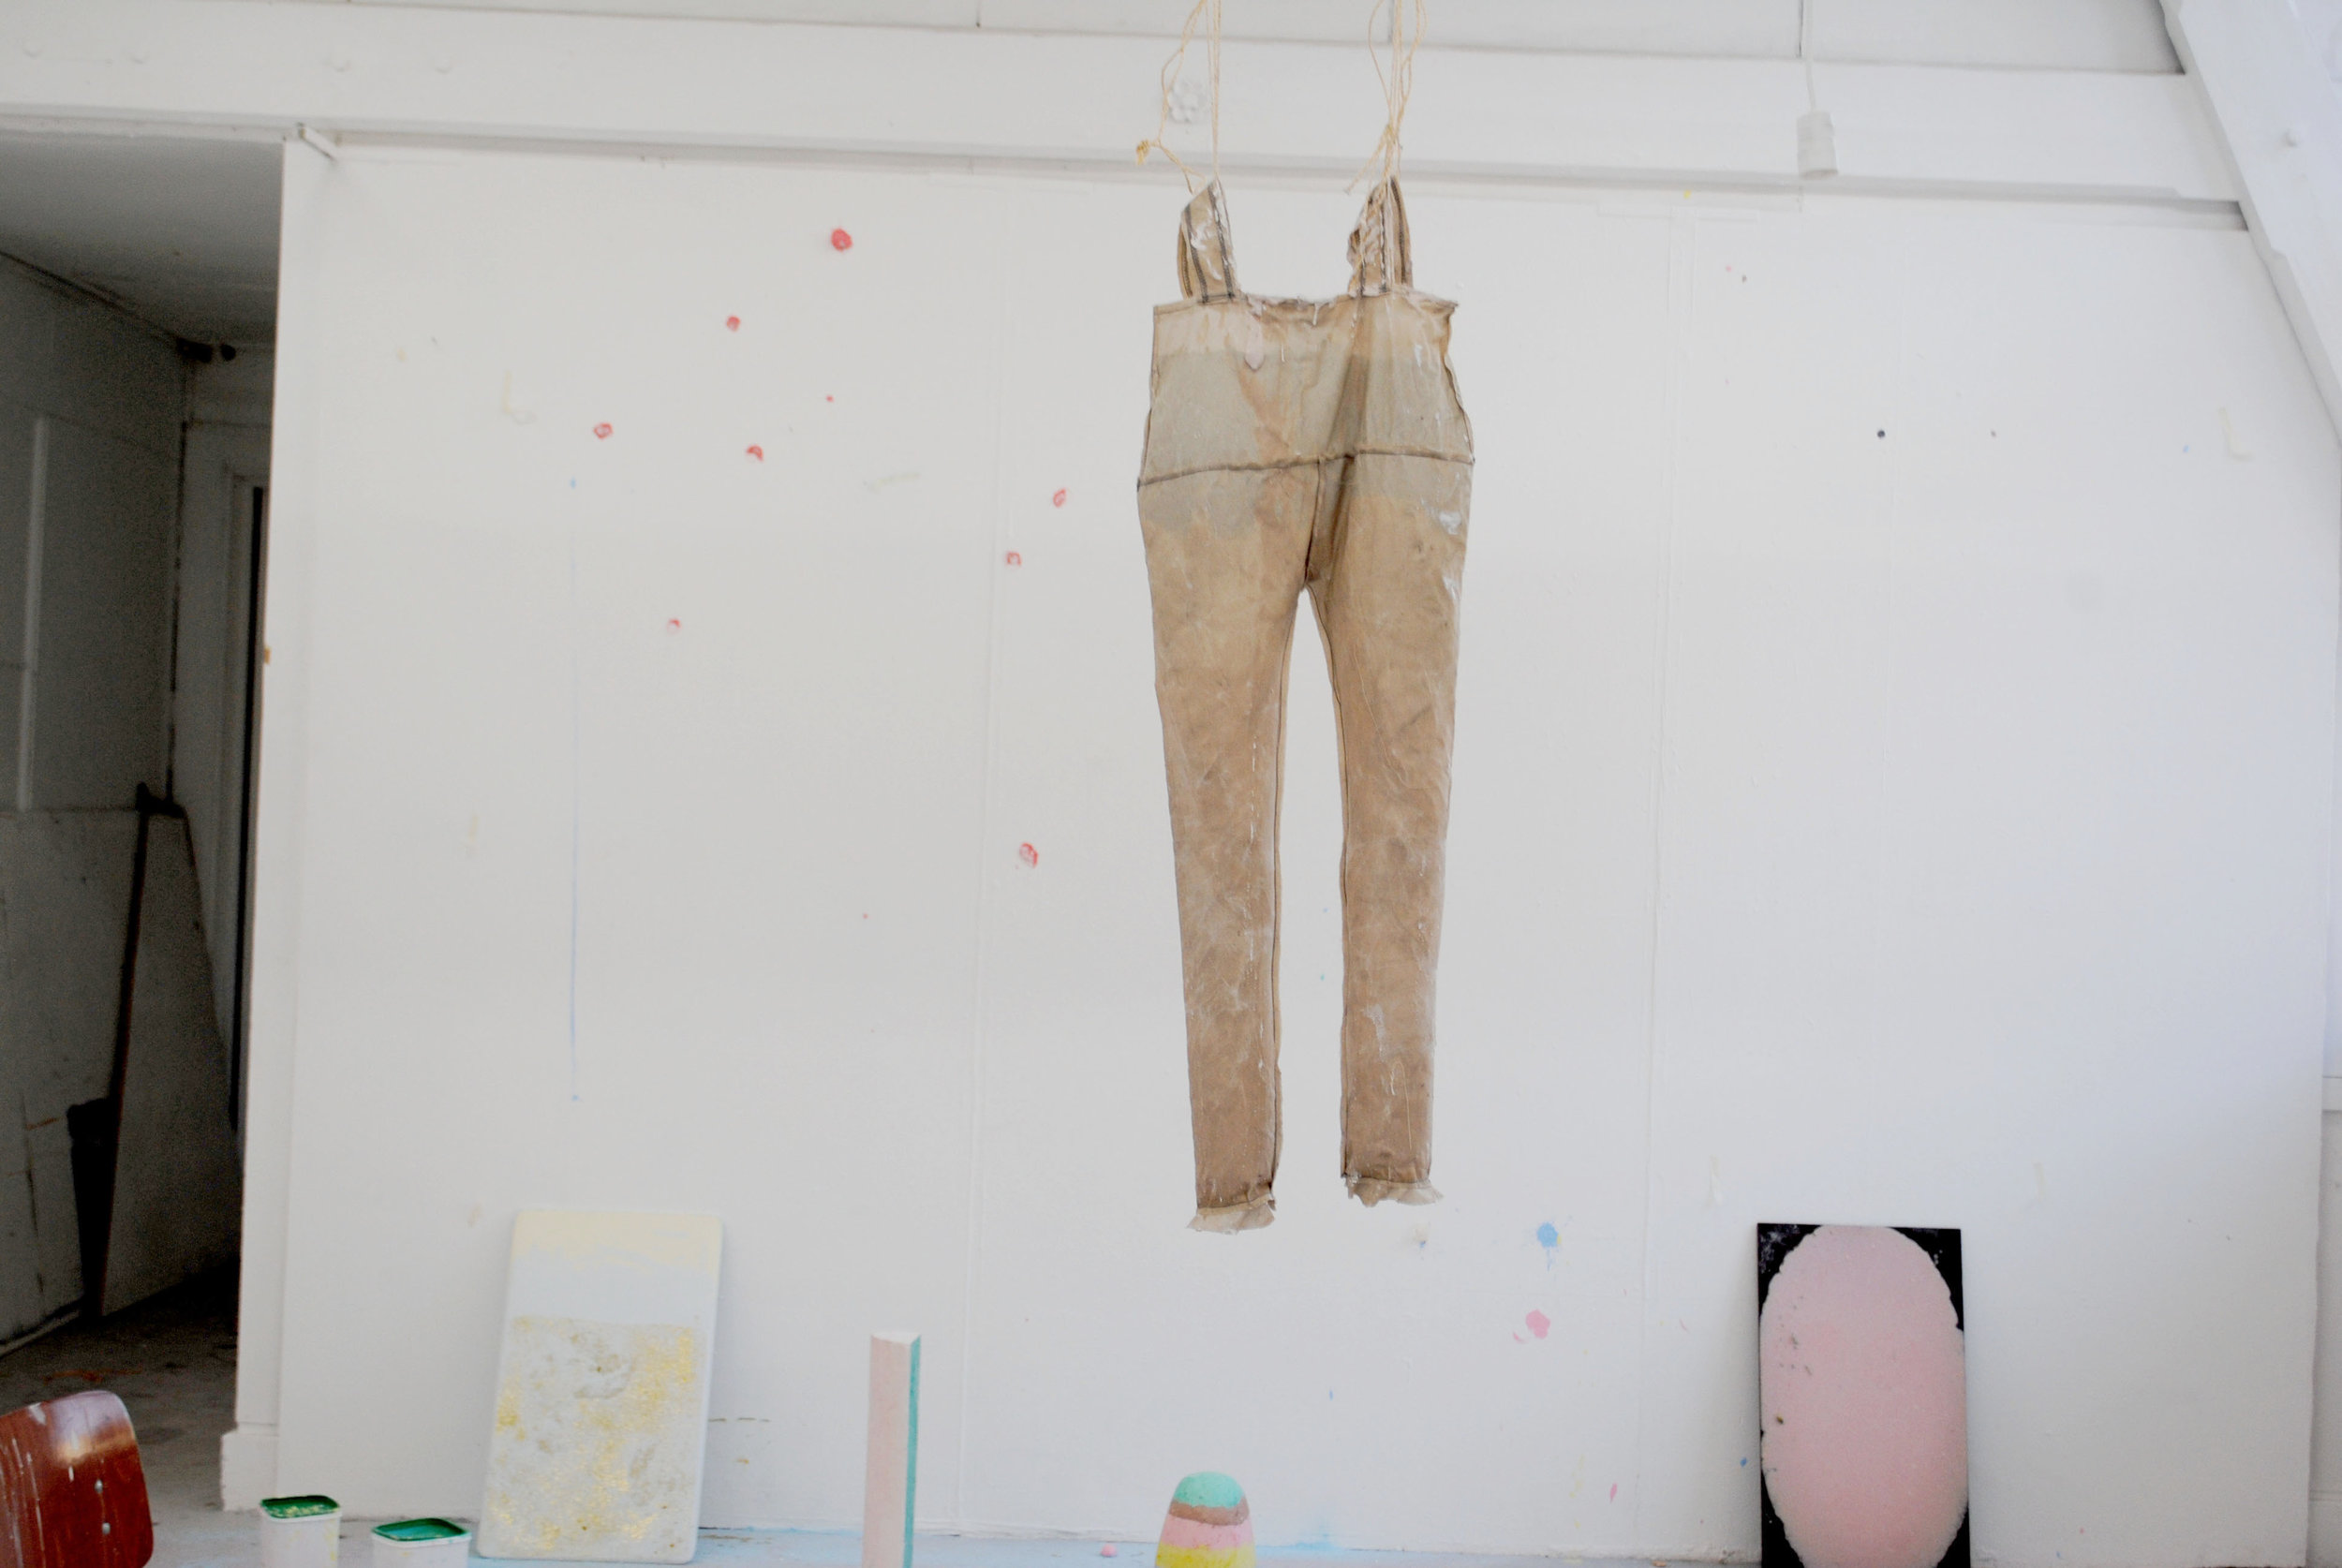 Studio View 2014: Mold (pants) - Textile, wax, colored chalk, rope, 140 cm, Maastricht, 2014